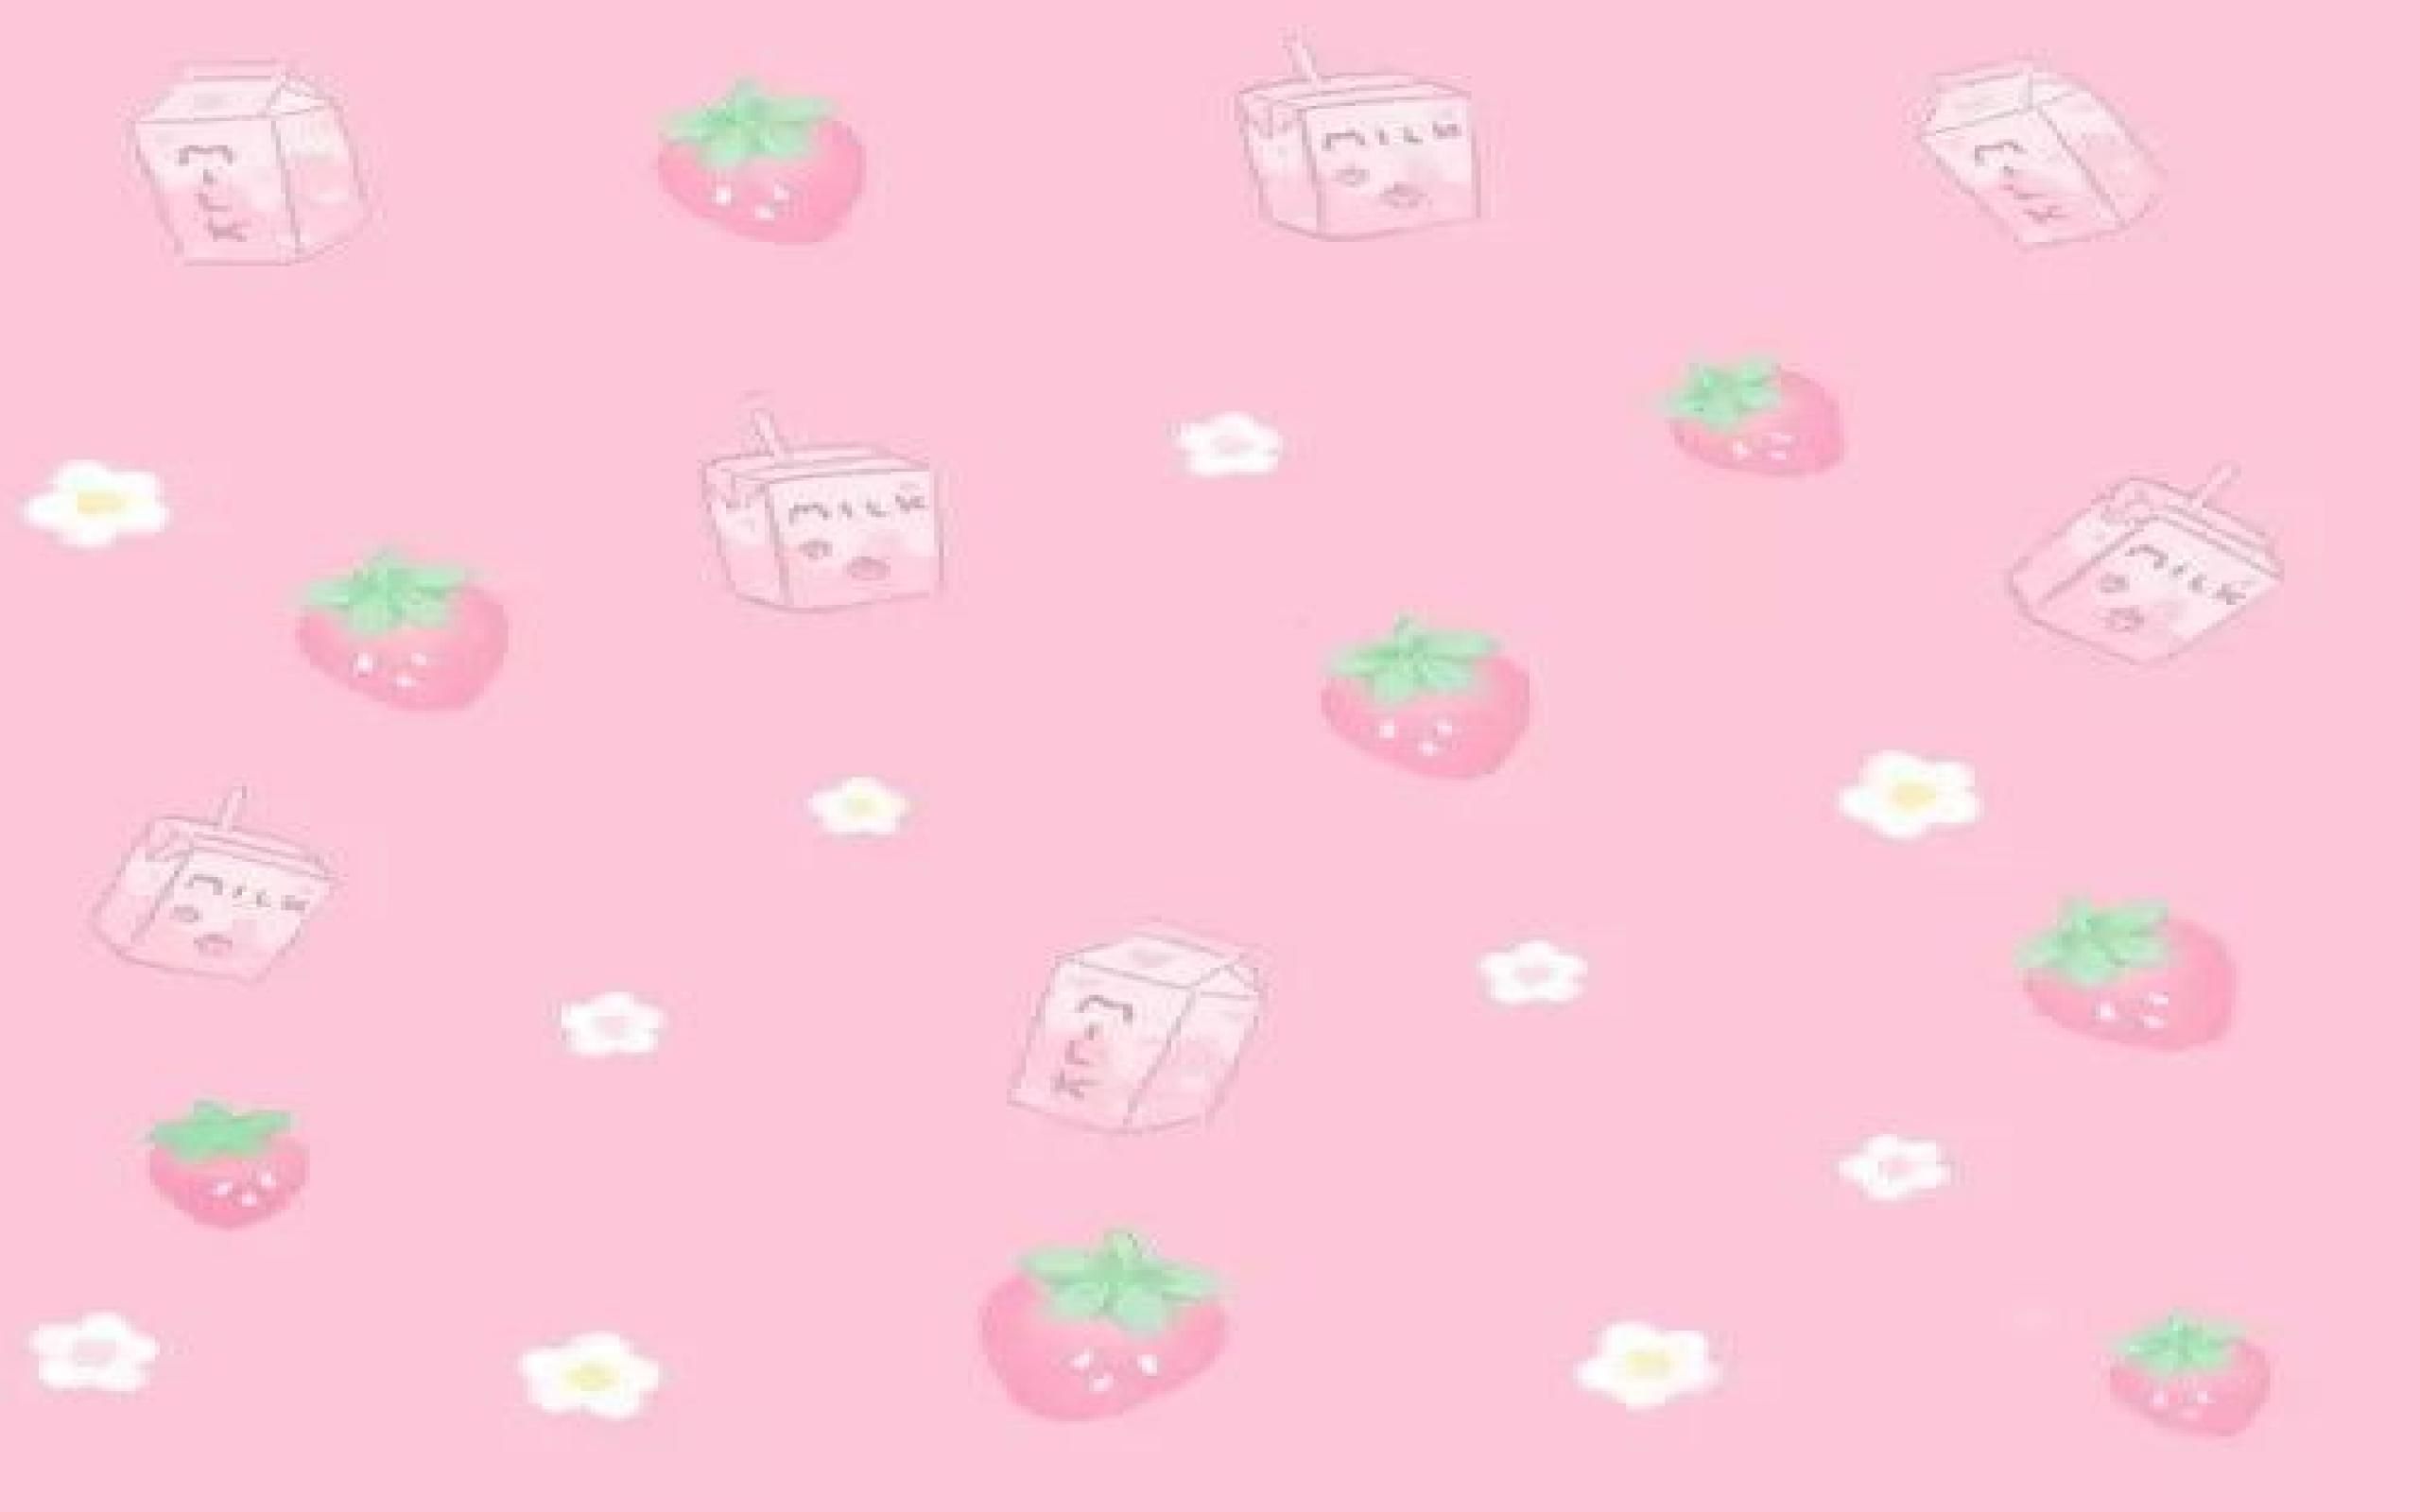 Desktop Kawaii Strawberry Milk Wallpapers Wallpaper Cave You can also upload and share your favorite strawberry milk aesthetic view all recent wallpapers ». desktop kawaii strawberry milk